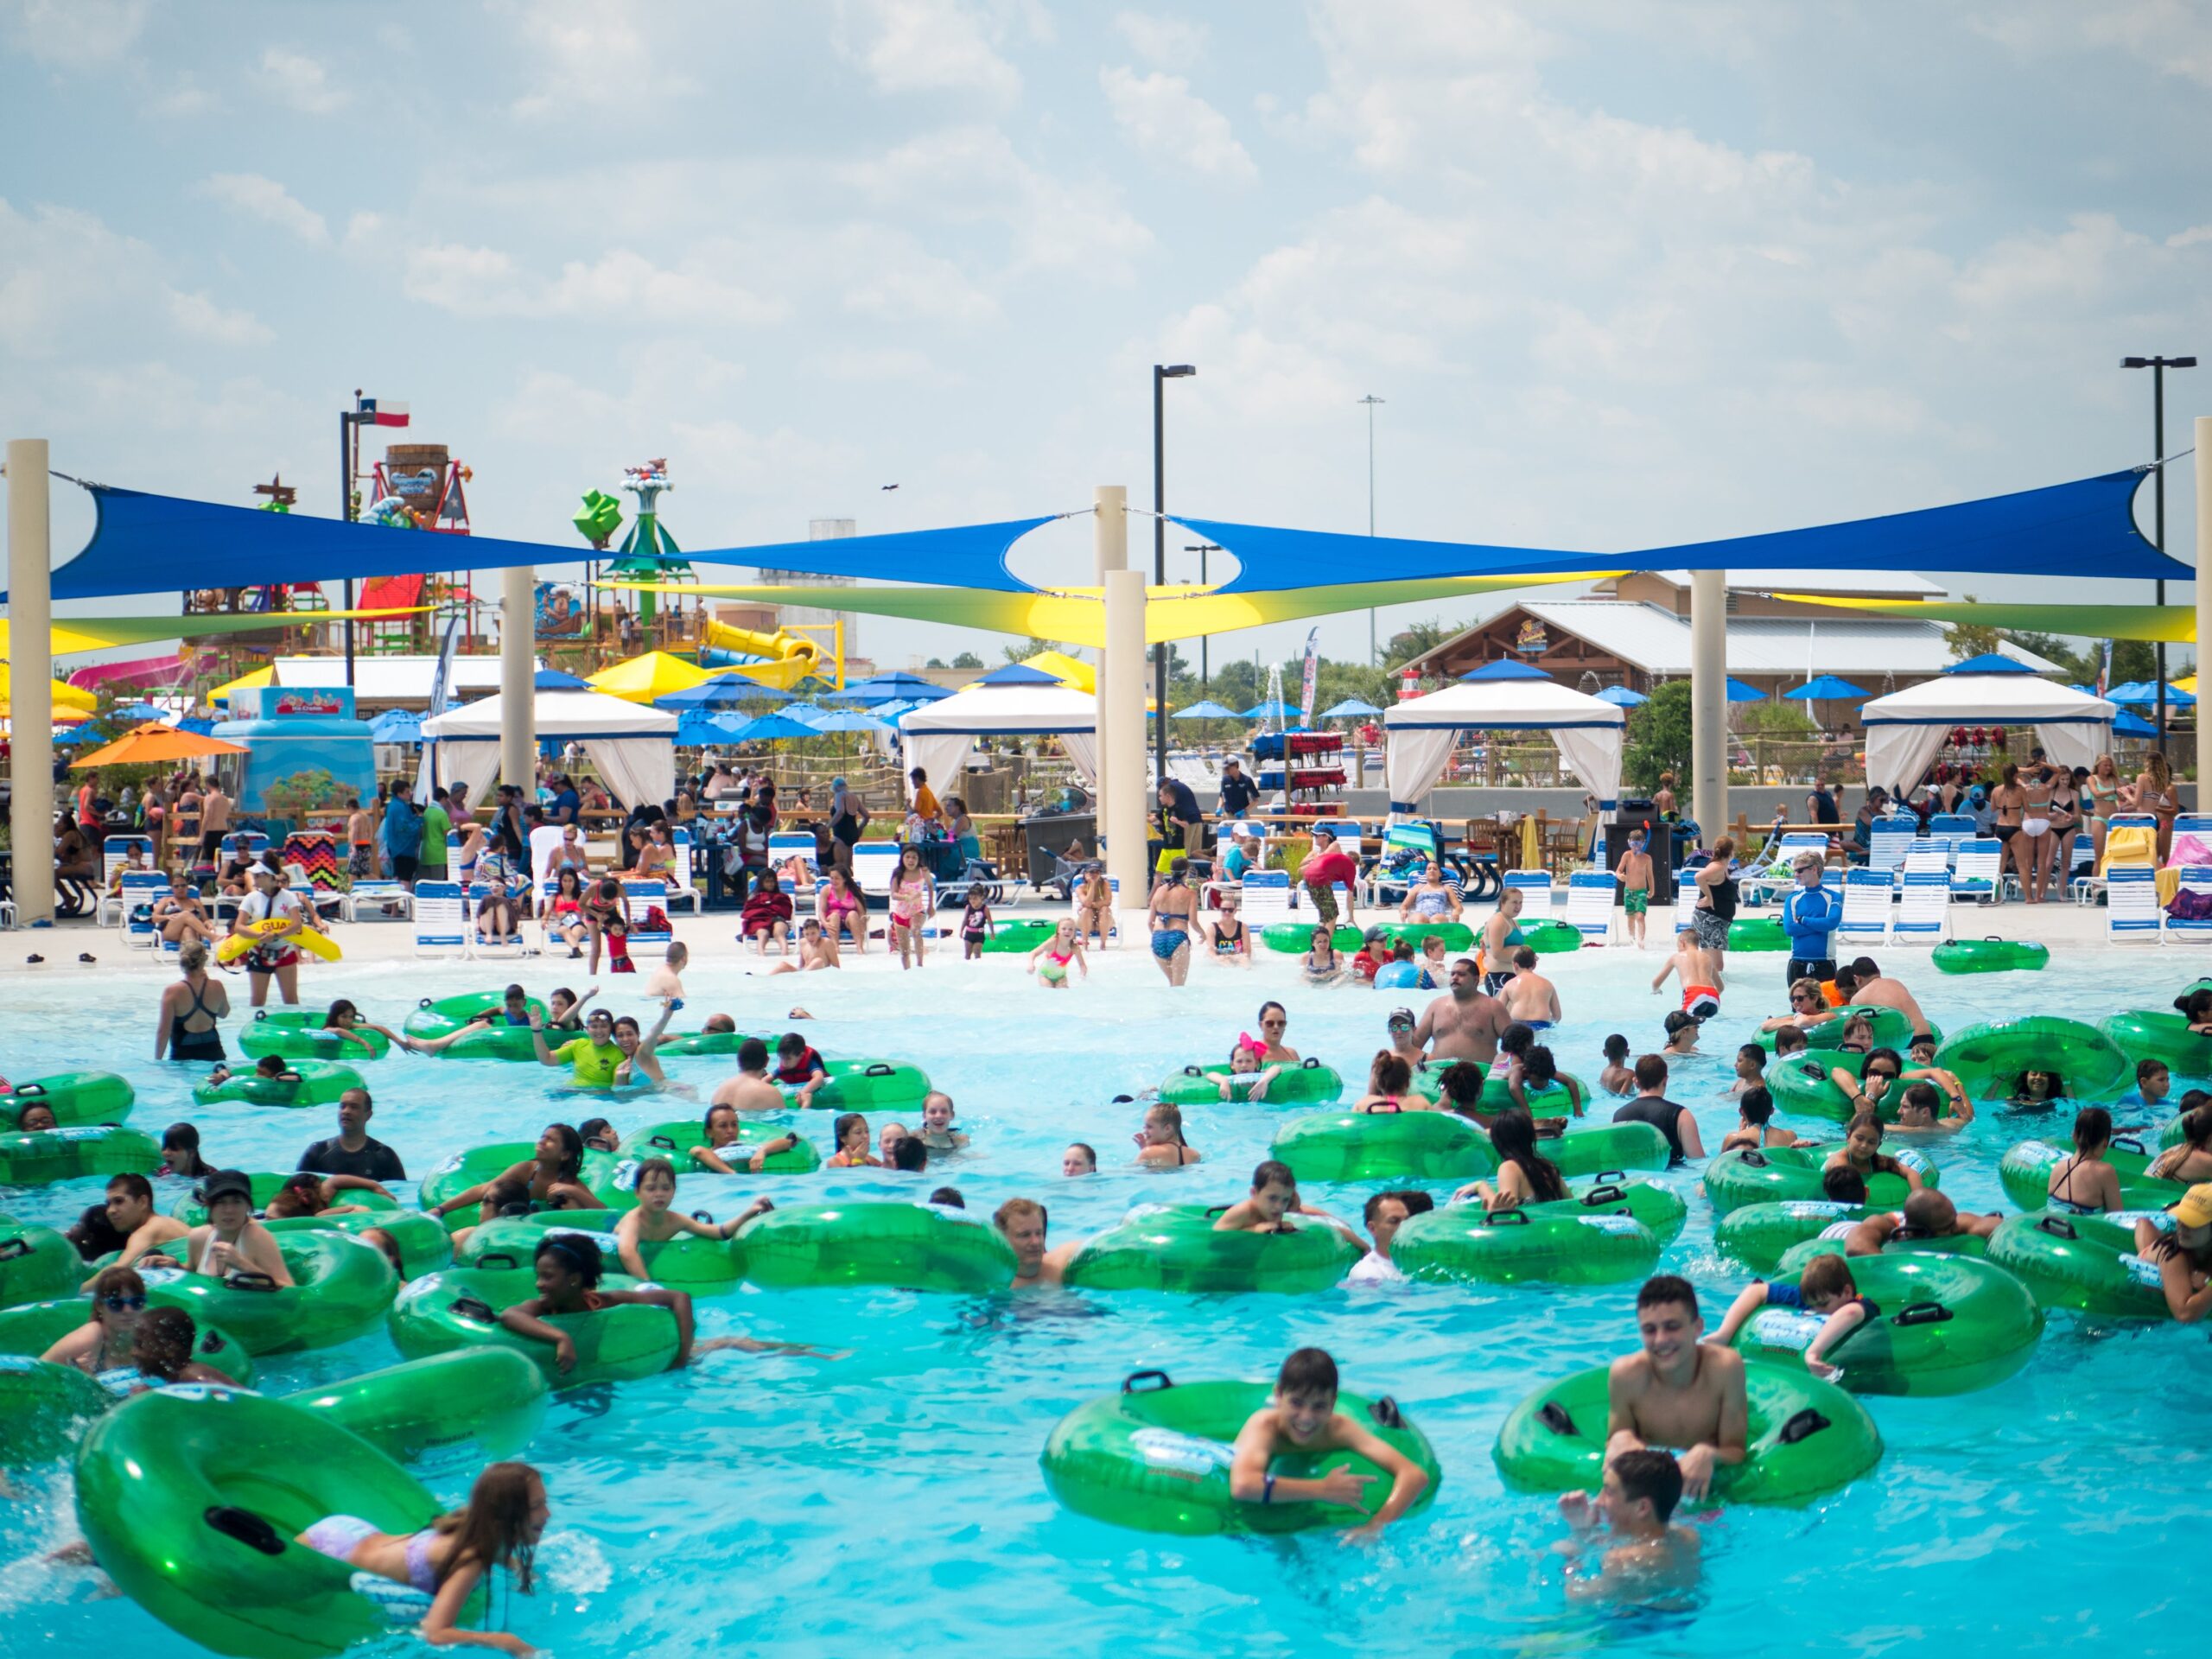 A crowded pool filled with swimmers and their green inflatable tubes.